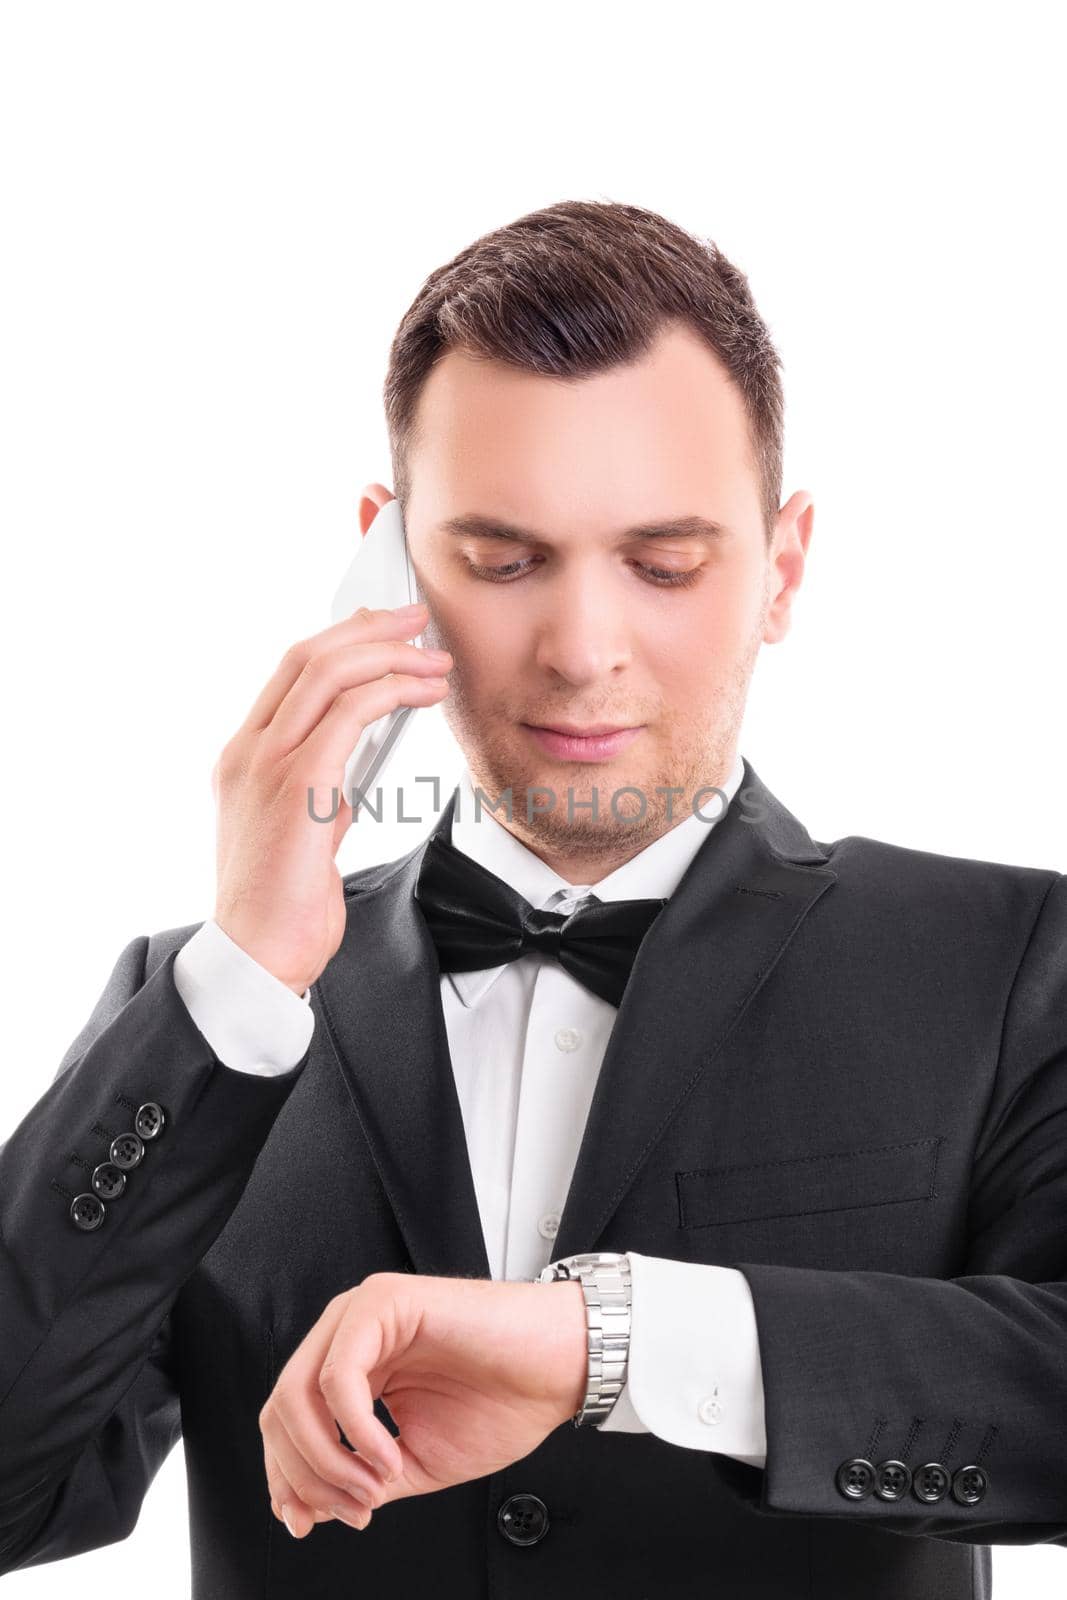 Close up portrait of a handsome serious man in black suit with bow tie talking on mobile phone while looking at his wristwatch, isolated on white background. Late concept.